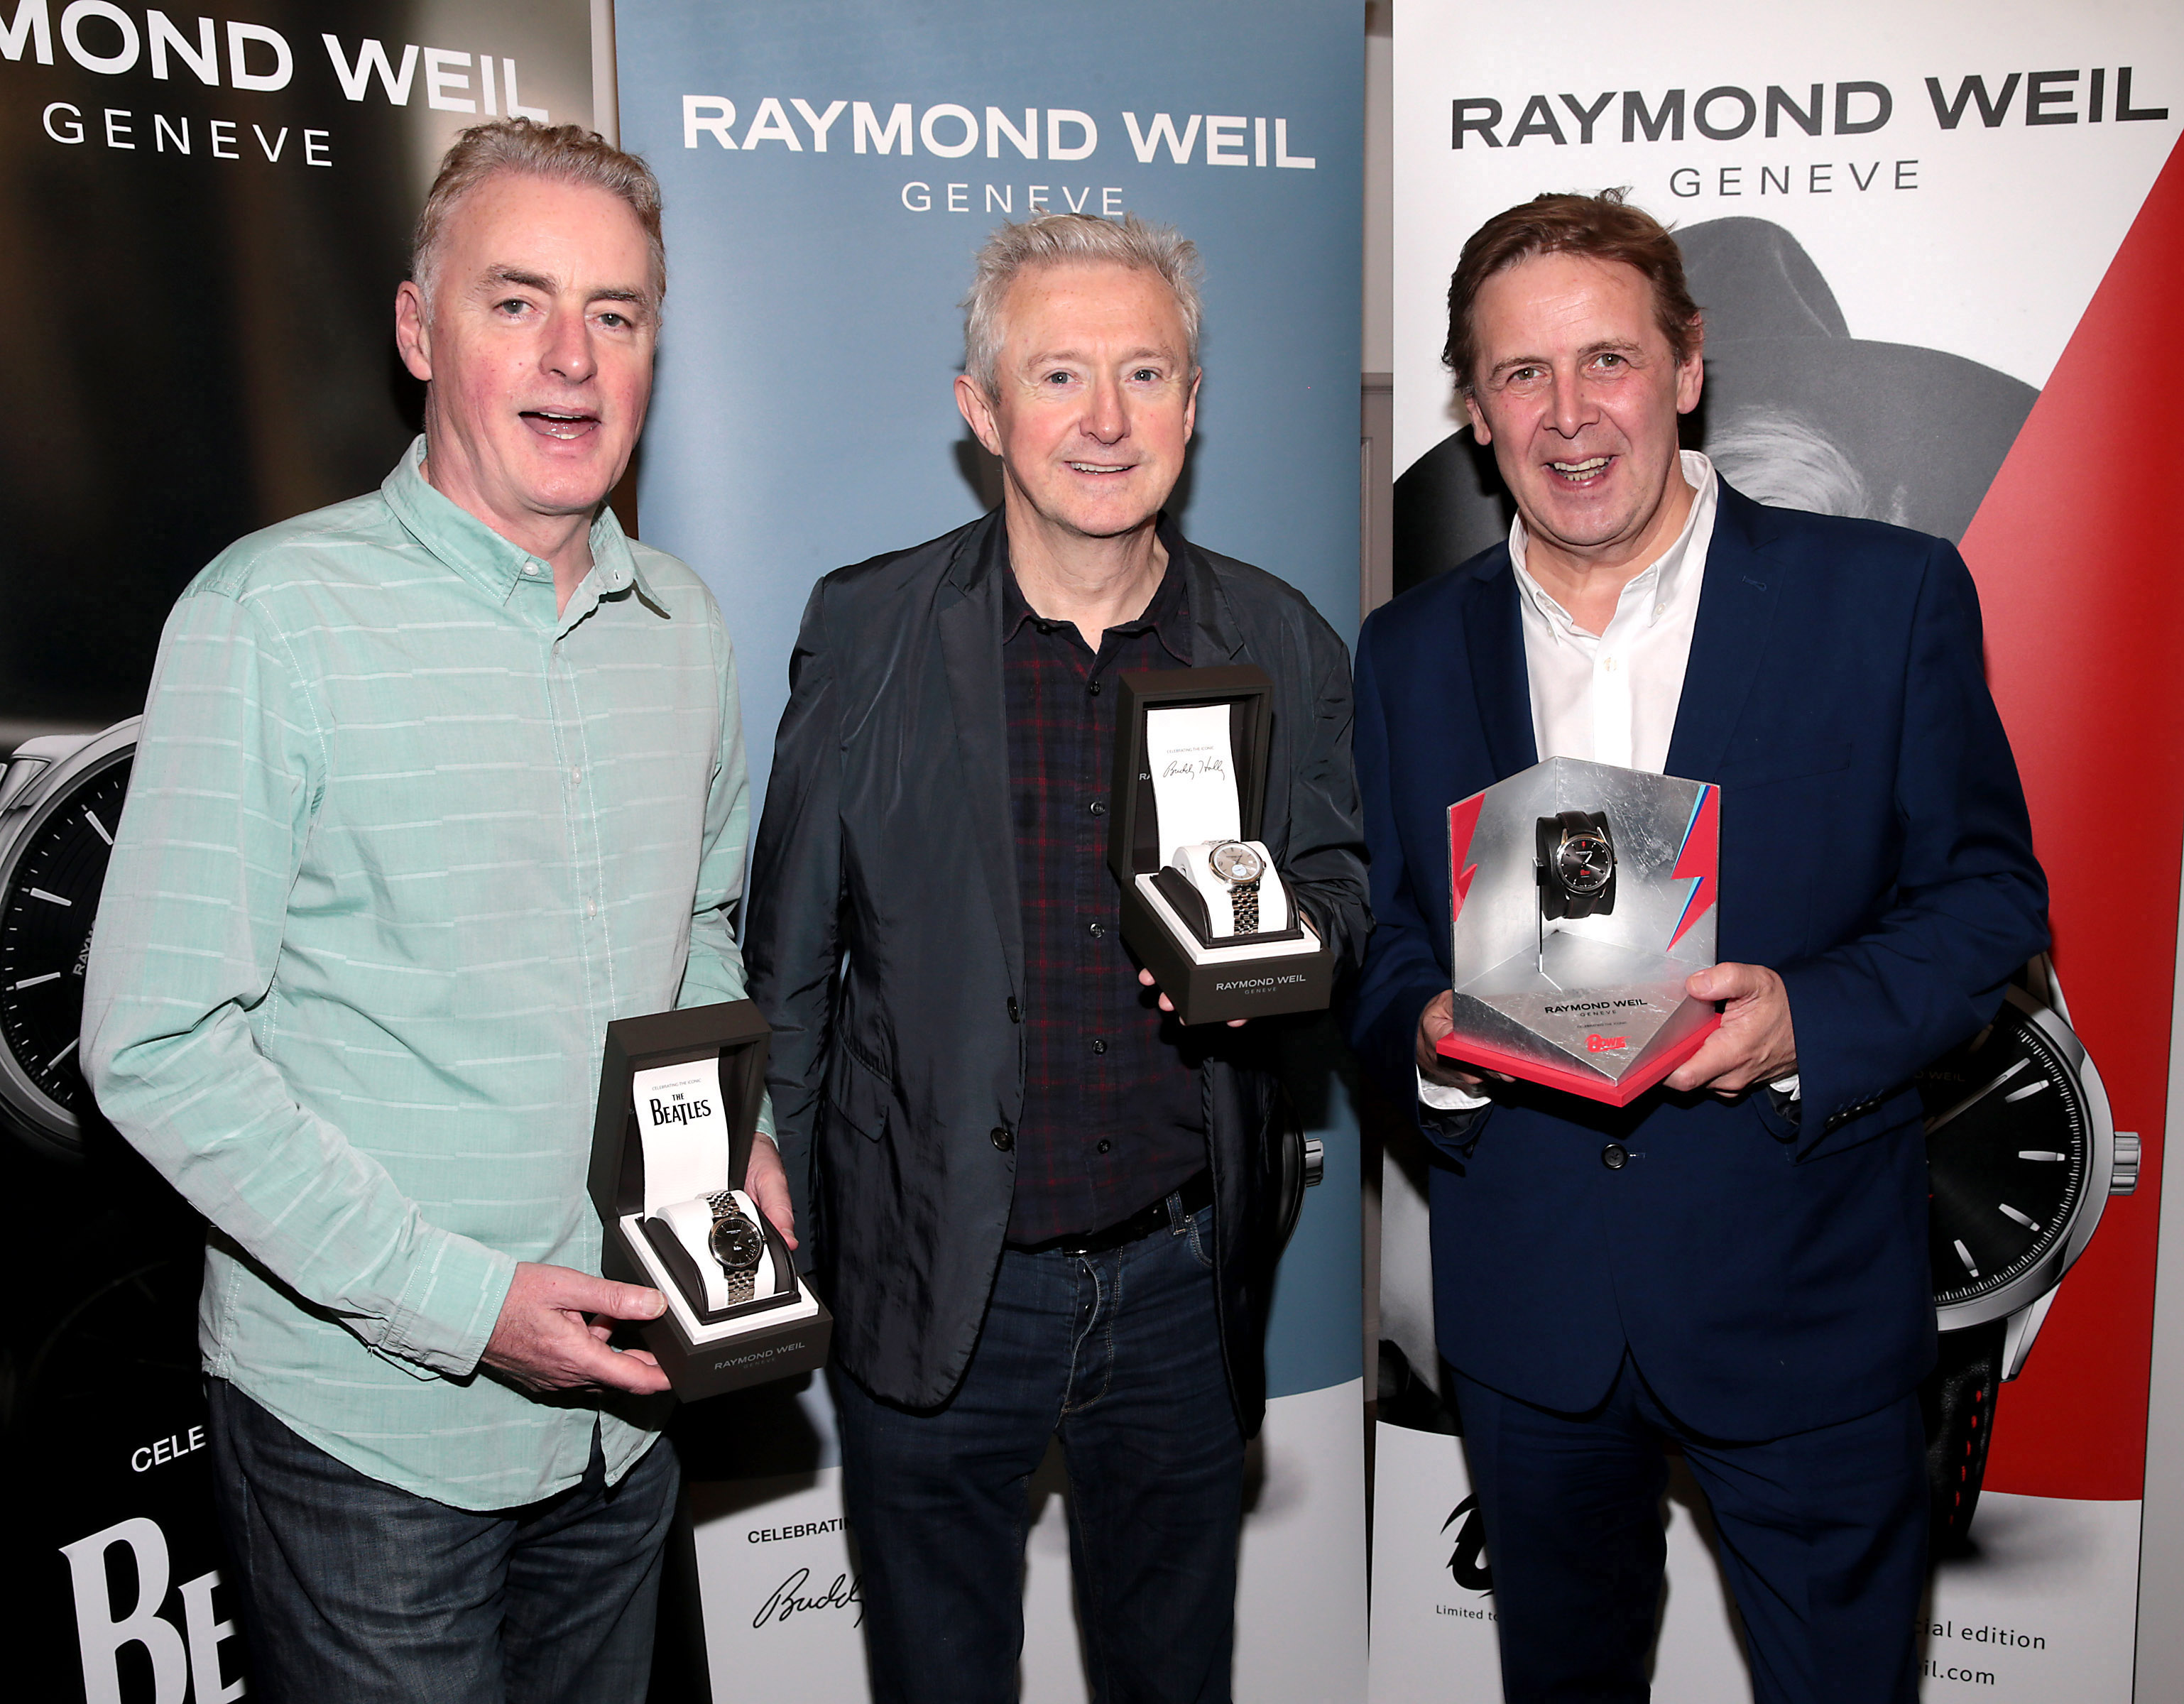 Dave Fanning  with his  Raymond Weil  Limited Edition  Maestro The Beatles Abbey Road watch,Louis Walsh with his  Raymond Weil  Limited Edition maestro watch which pays tribute to legendary musician Buddy Holly and  Ian Dempsey with his  Raymond Weil  Limited Edition freelancer David Bowie watch  featuring the lightning bolt that was painted across his face which first appeared on the cover of the Aladdin Sane album in 1973 at Weirs Grafton Street ,Dublin ,

Picture Brian McEvoy
No Repro fee for one use 

RAYMOND WEIL CELEBRATES THE GENIUS OF THREE LEGENDARY MUSIC REPERTOIRES   DAVID BOWIE, THE BEATLES & BUDDY HOLLY WITH THREE ICONS OF THE IRISH MUSIC INDUSTRY LOUIS WALSH, IAN DEMPSEY AND DAVE FANNING

 

Renowned Swiss luxury watchmaker RAYMOND WEIL is paying homage to the holy trinity of music icons David Bowie, The Beatles and Buddy Holly with the release of three exclusive limited edition timepieces.  To mark the launch of these signature pieces, Craig Leach, Brand Director of RAYMOND WEIL presented three Icons of the Irish music industry with their Heros watches - Louis Walsh with Buddy Holly; Ian Dempsey with David Bowie and Dave Fanning with The Beatles, in Weir & Sons, Grafton Street, Dublin.

 

An impresario of the contemporary music scene, Louiss roots are in the guitar rifts of Buddy Holly, globally recognised as the pioneer of Rock nRoll. RAYMOND WEIL in collaboration with his wife Maria Elena Holly, has designed the Limited Edition maestro which pays tribute to legendary musician Buddy Holly.

 

A lifelong fan of David Bowie, Ian Dempsey proved his devotion to him when as part of last years Today FMs Dare To Care campaign, he got a black star tattooed on his arm as a tribute to David Bowie whose last album was titled Black Star.RAYMOND WEIL presented Ian with the freelancer David Bowie featuring the lightning bolt that was painted across his face which first appeared on the cover of the Aladdin Sane album in 1973.

 

Dave Fanning, an